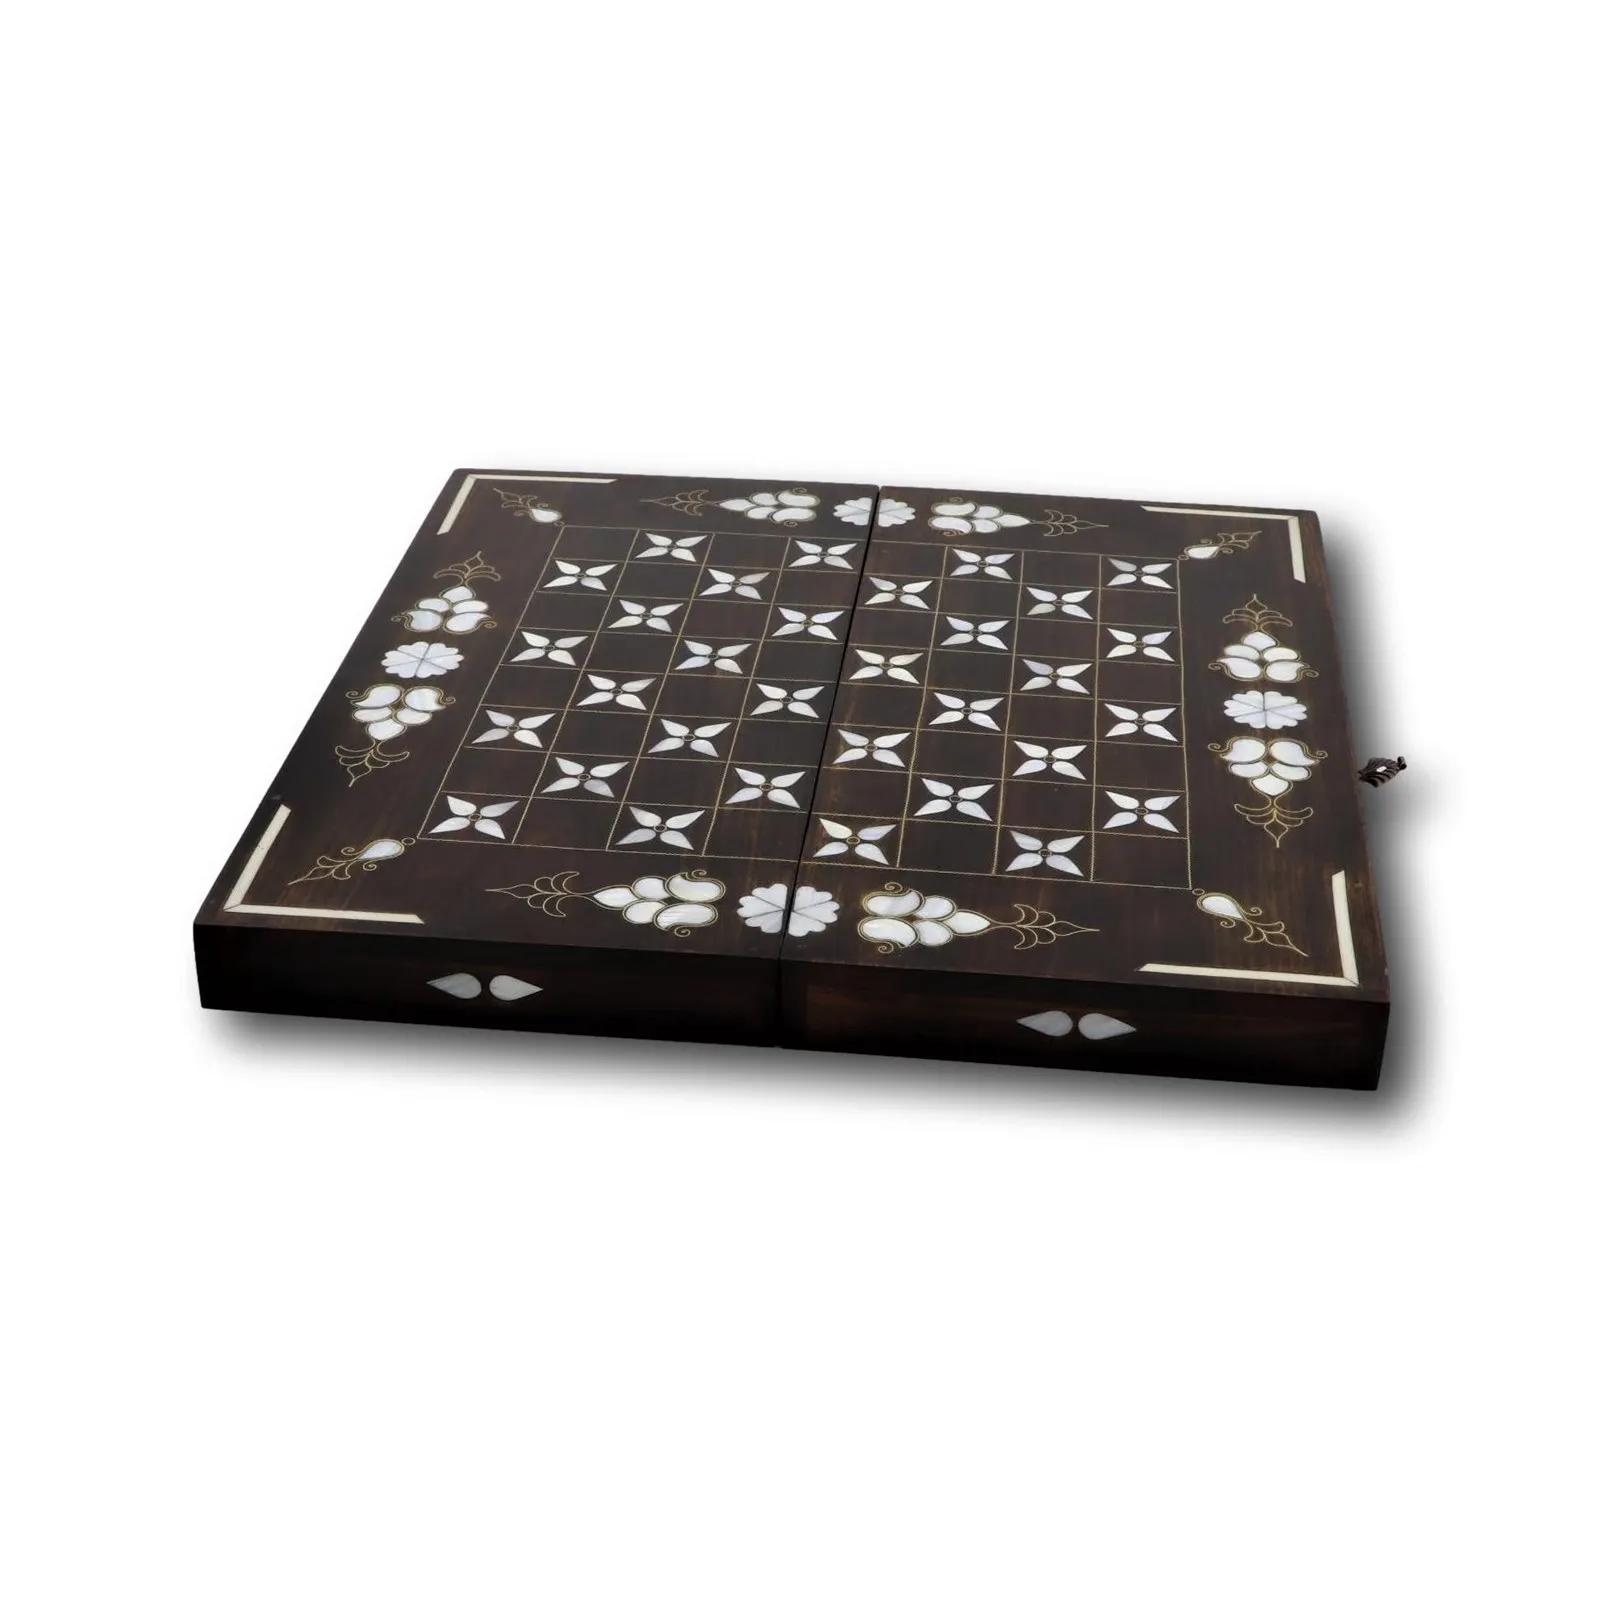 

Morya Wooden Checkers and Backgammon Set Lux Mother of Pearl Embroidered